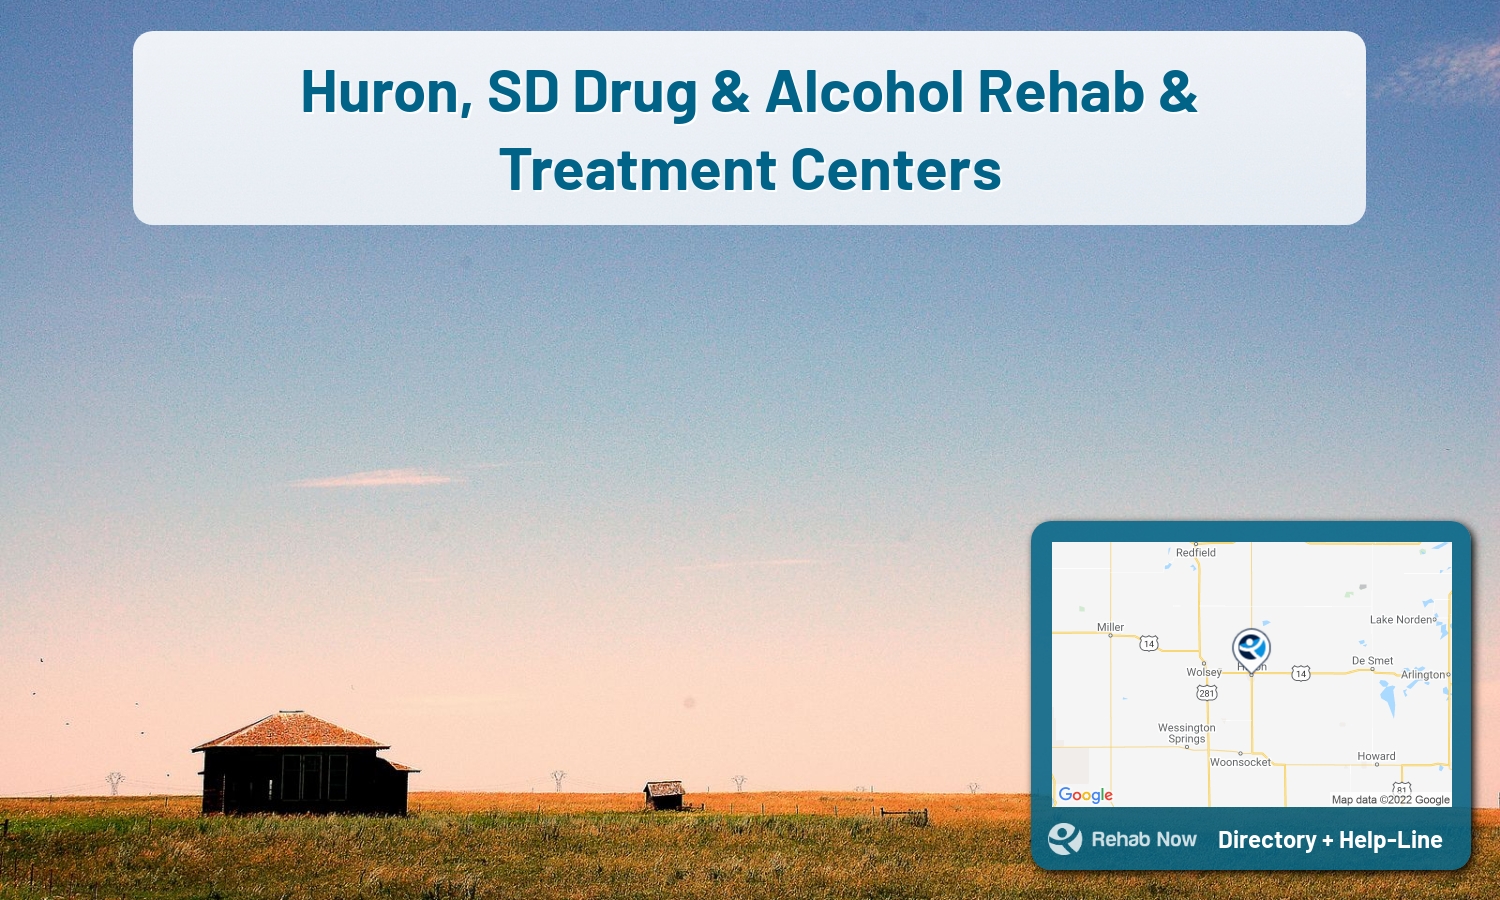 Huron, SD Treatment Centers. Find drug rehab in Huron, South Dakota, or detox and treatment programs. Get the right help now!